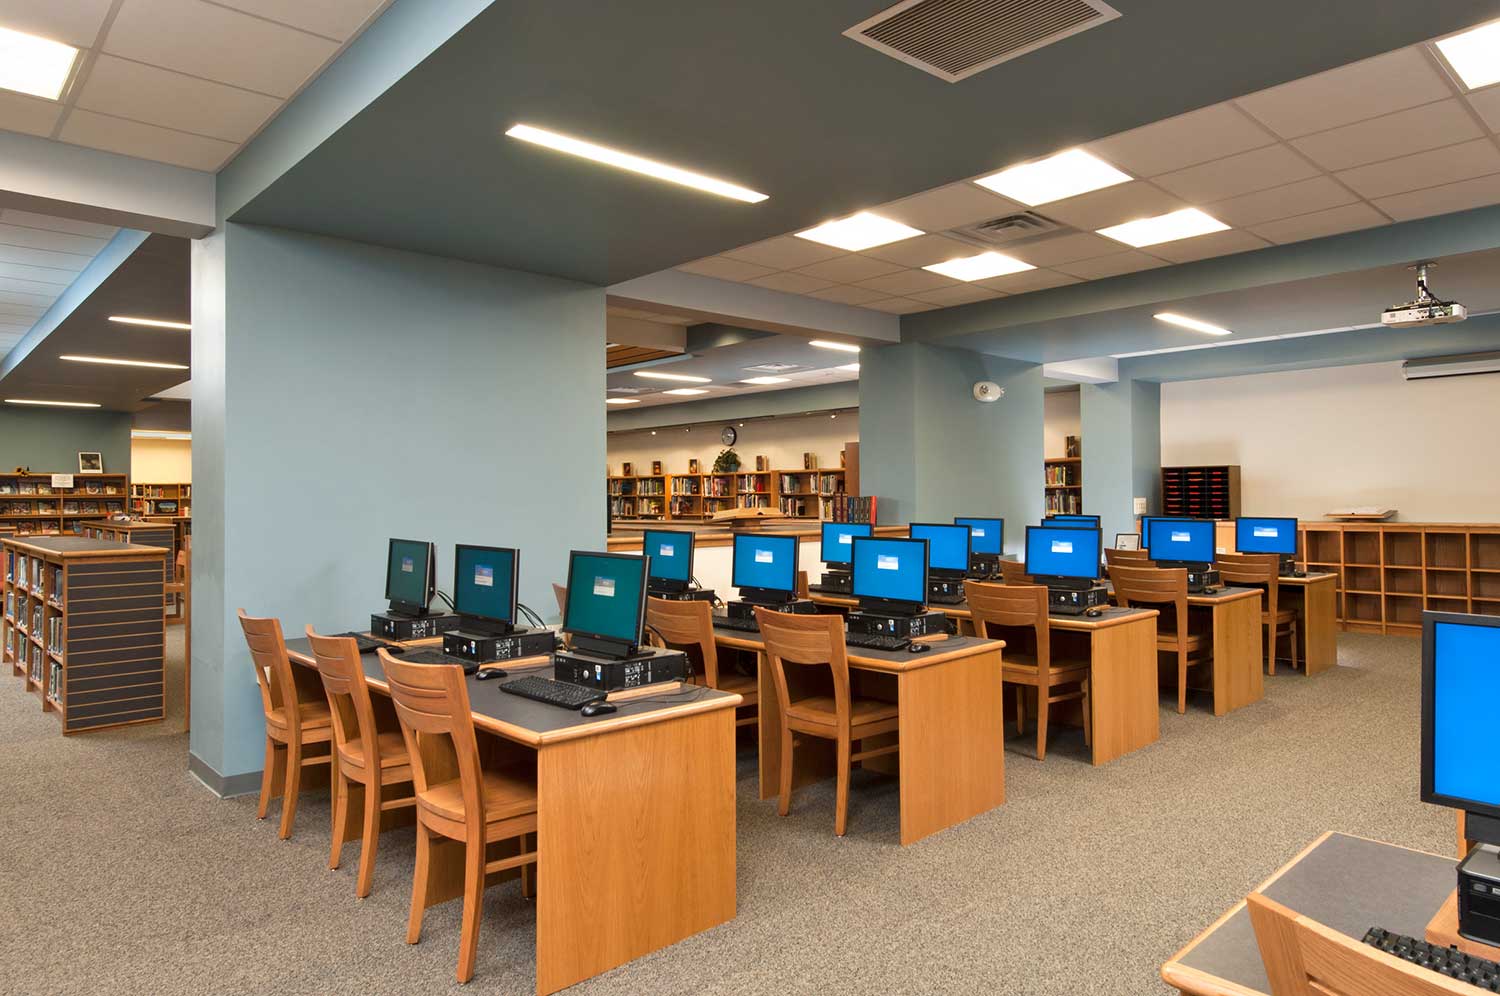 Mosaic's library renovation for Scotia-Glenville Middle School enclosed the open space for acoustics and filled it with light for instruction, a computer lab, office and multimedia room.